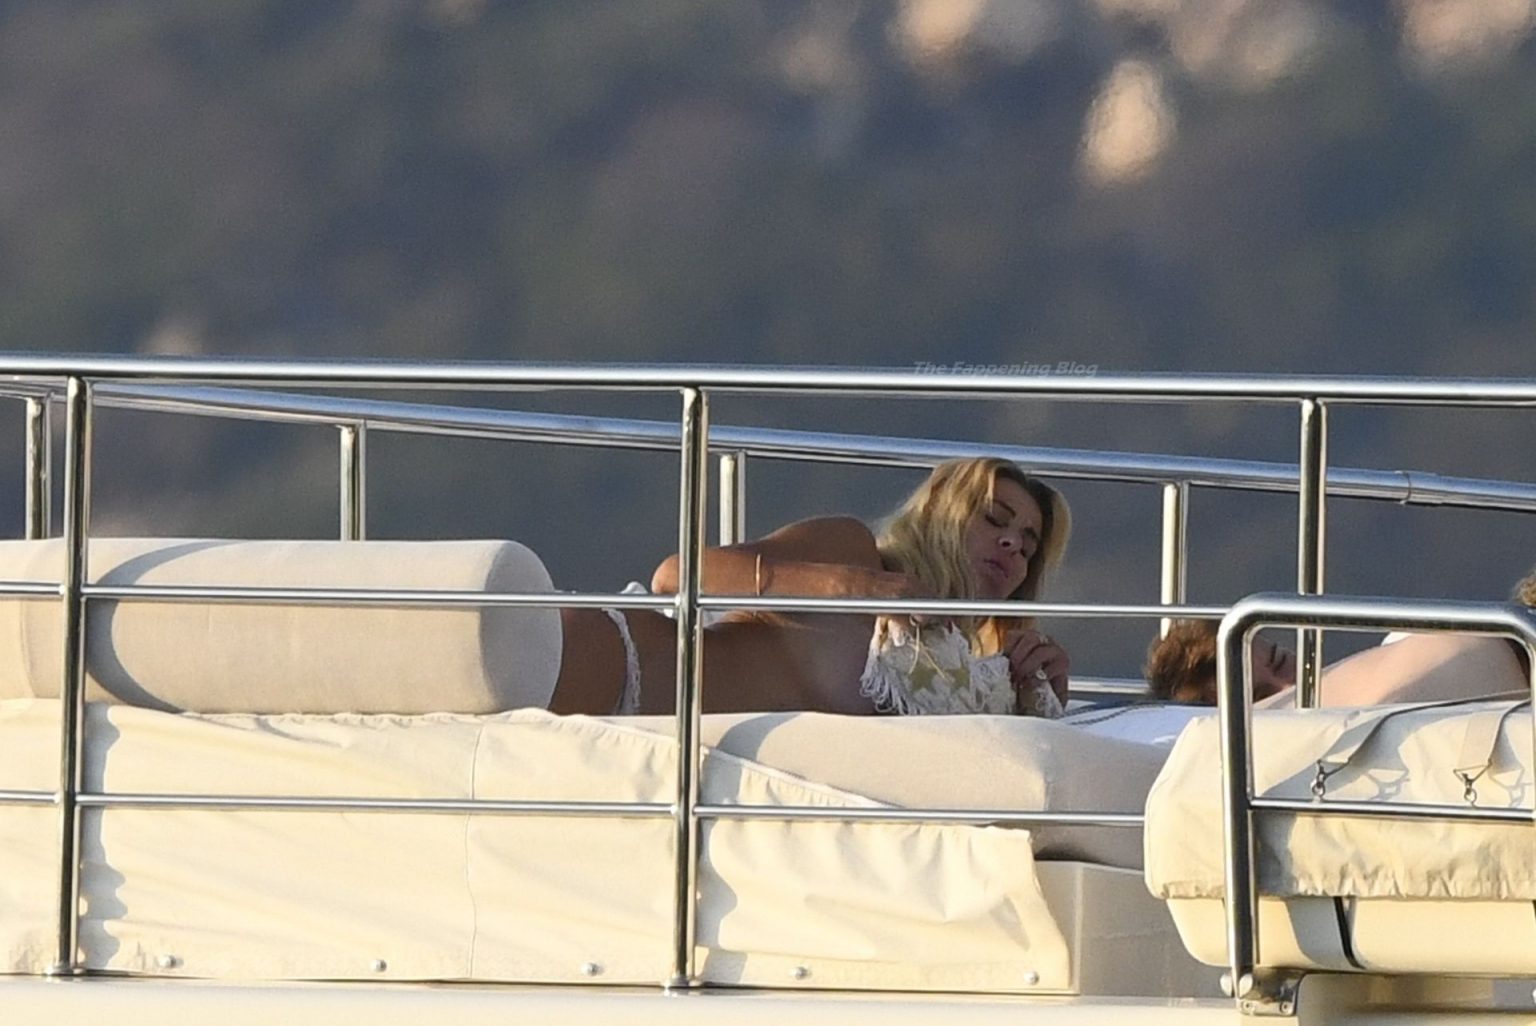 Valeria Marini Shows Off Her Nude Boobs And Butt On Holiday In Sardinia